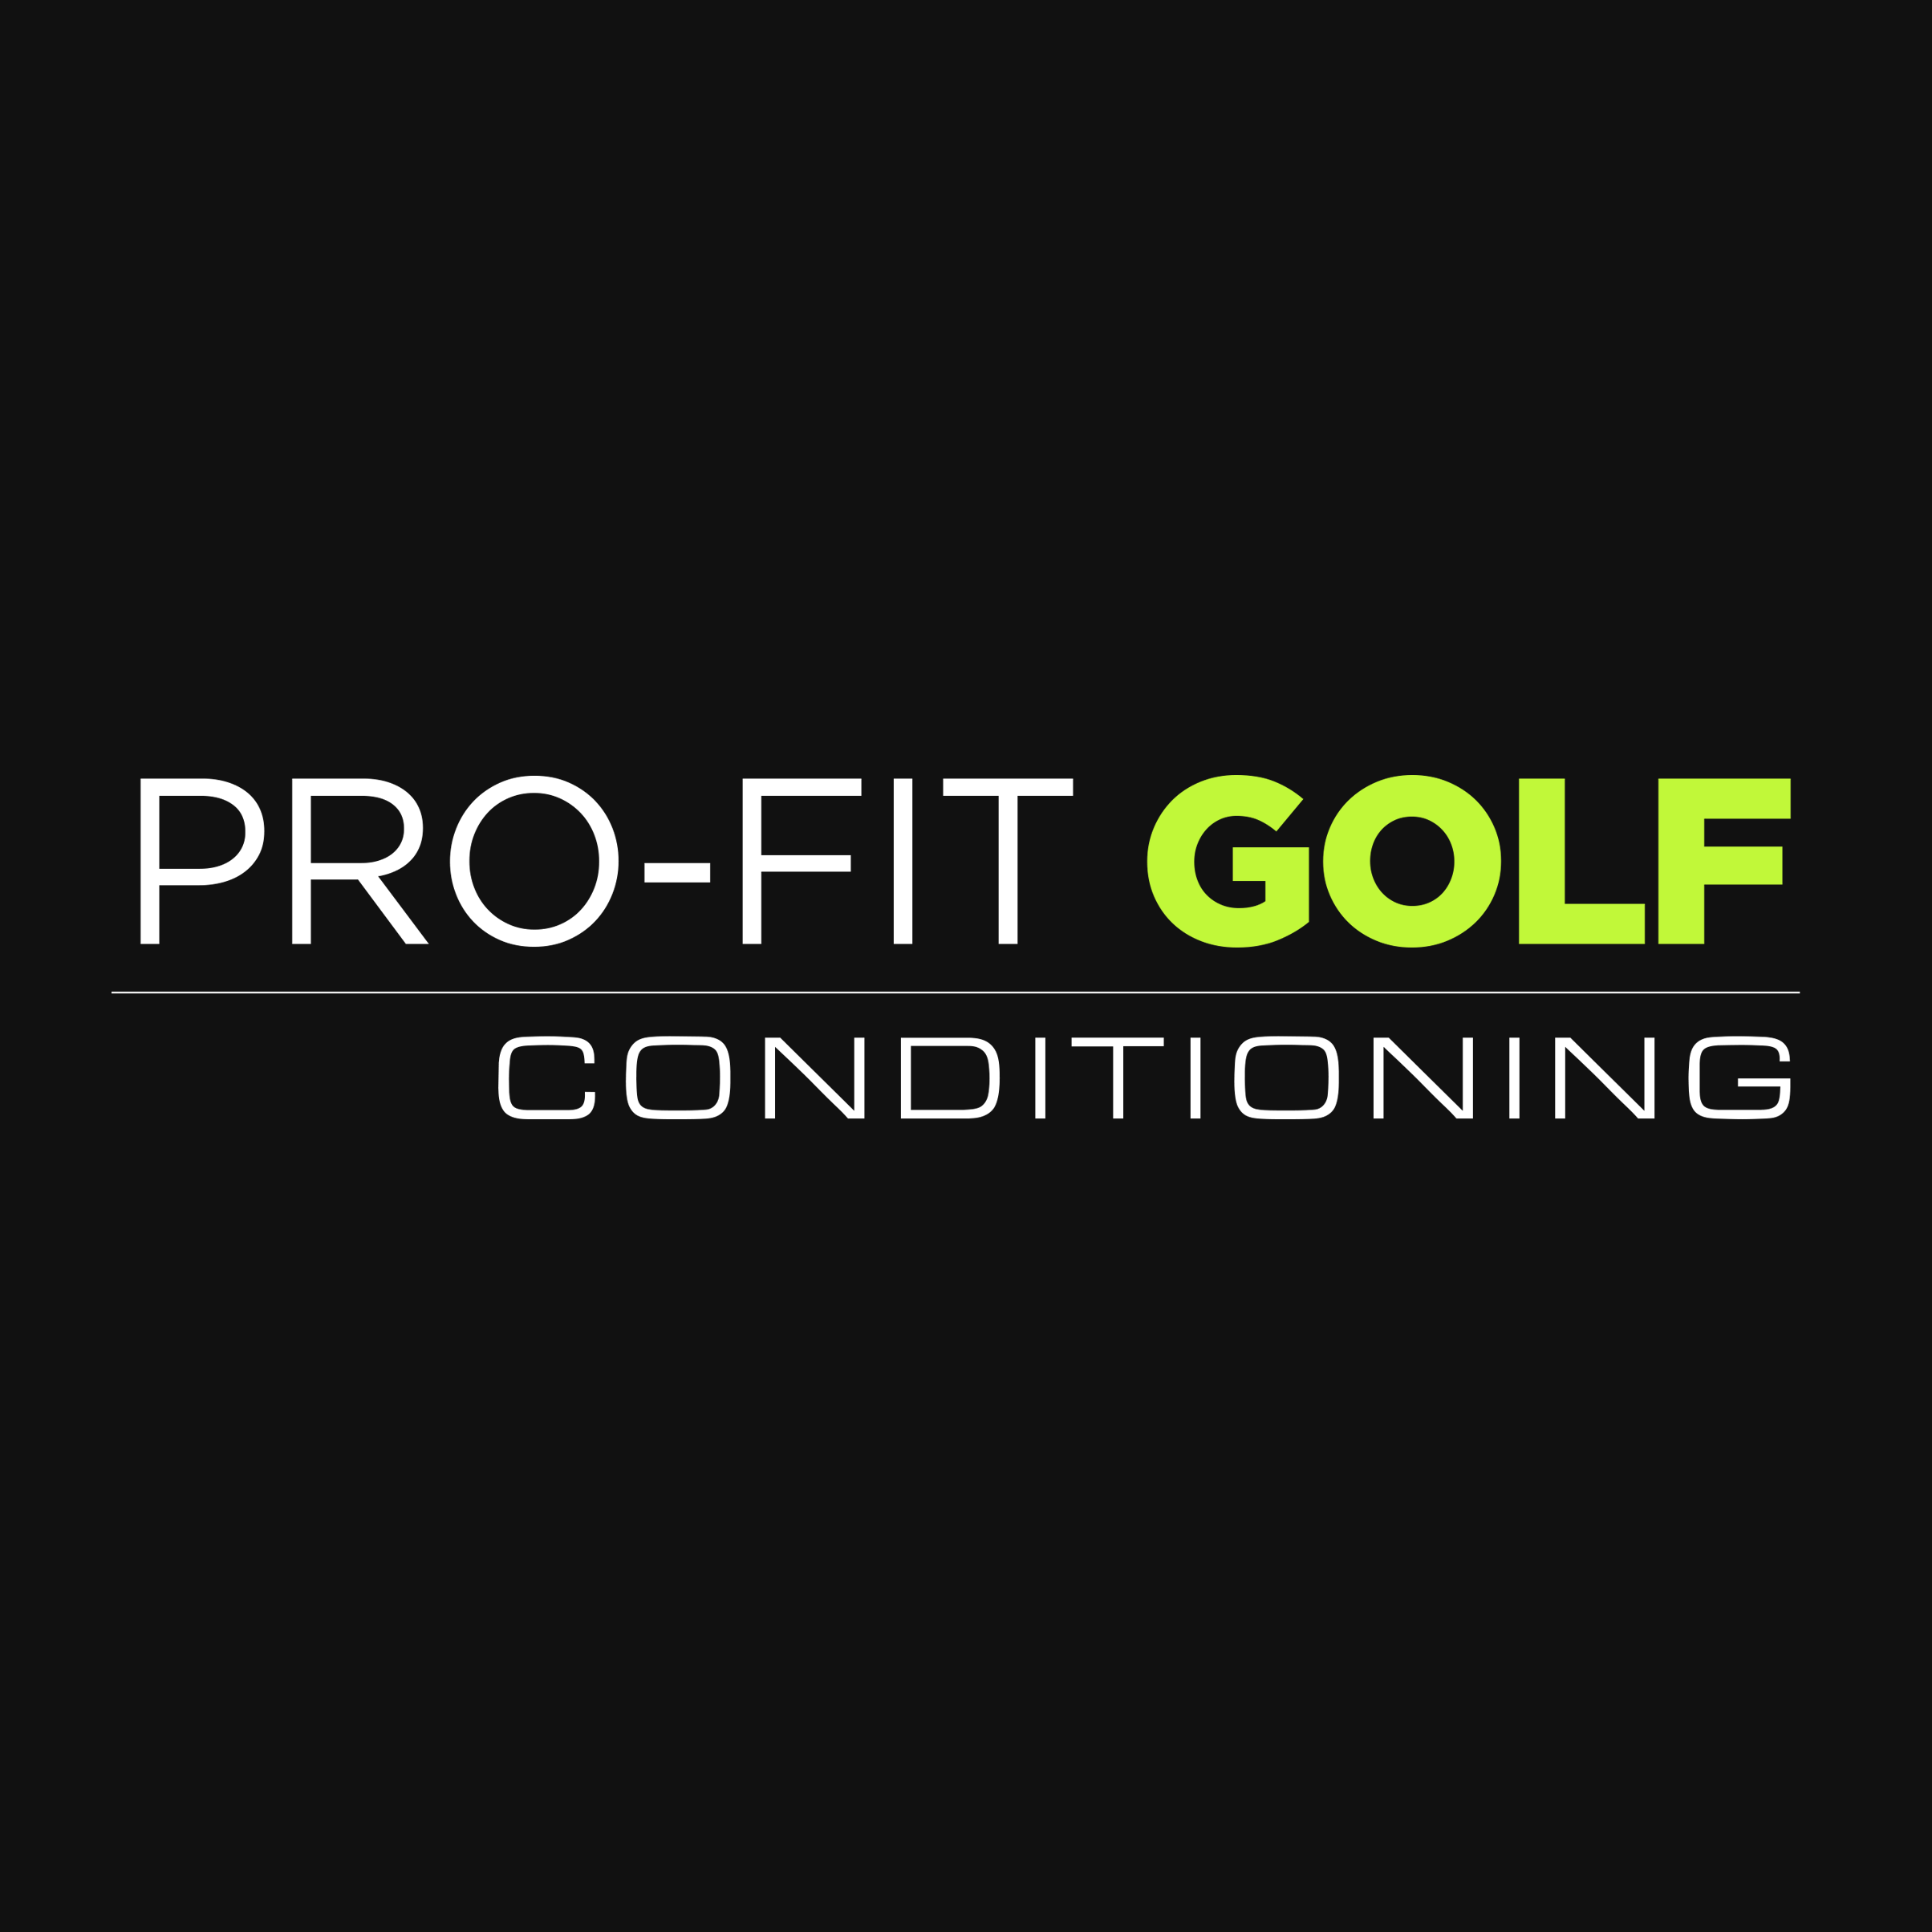 Pro-Fit Golf Conditioning logo